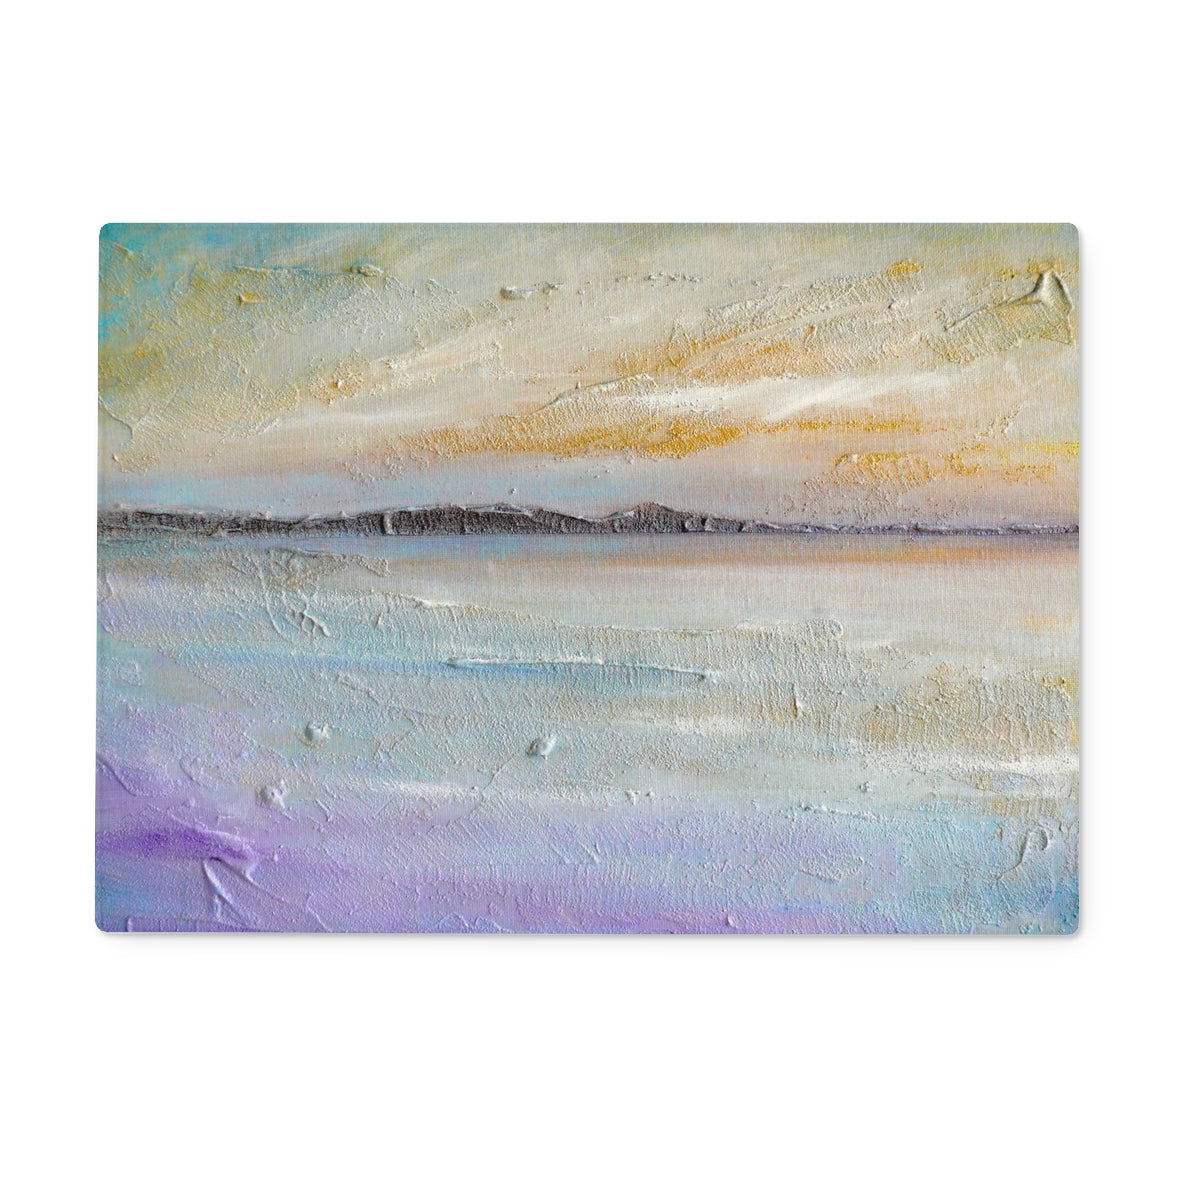 Sollas Beach North Uist Art Gifts Glass Chopping Board-Glass Chopping Boards-Hebridean Islands Art Gallery-15"x11" Rectangular-Paintings, Prints, Homeware, Art Gifts From Scotland By Scottish Artist Kevin Hunter